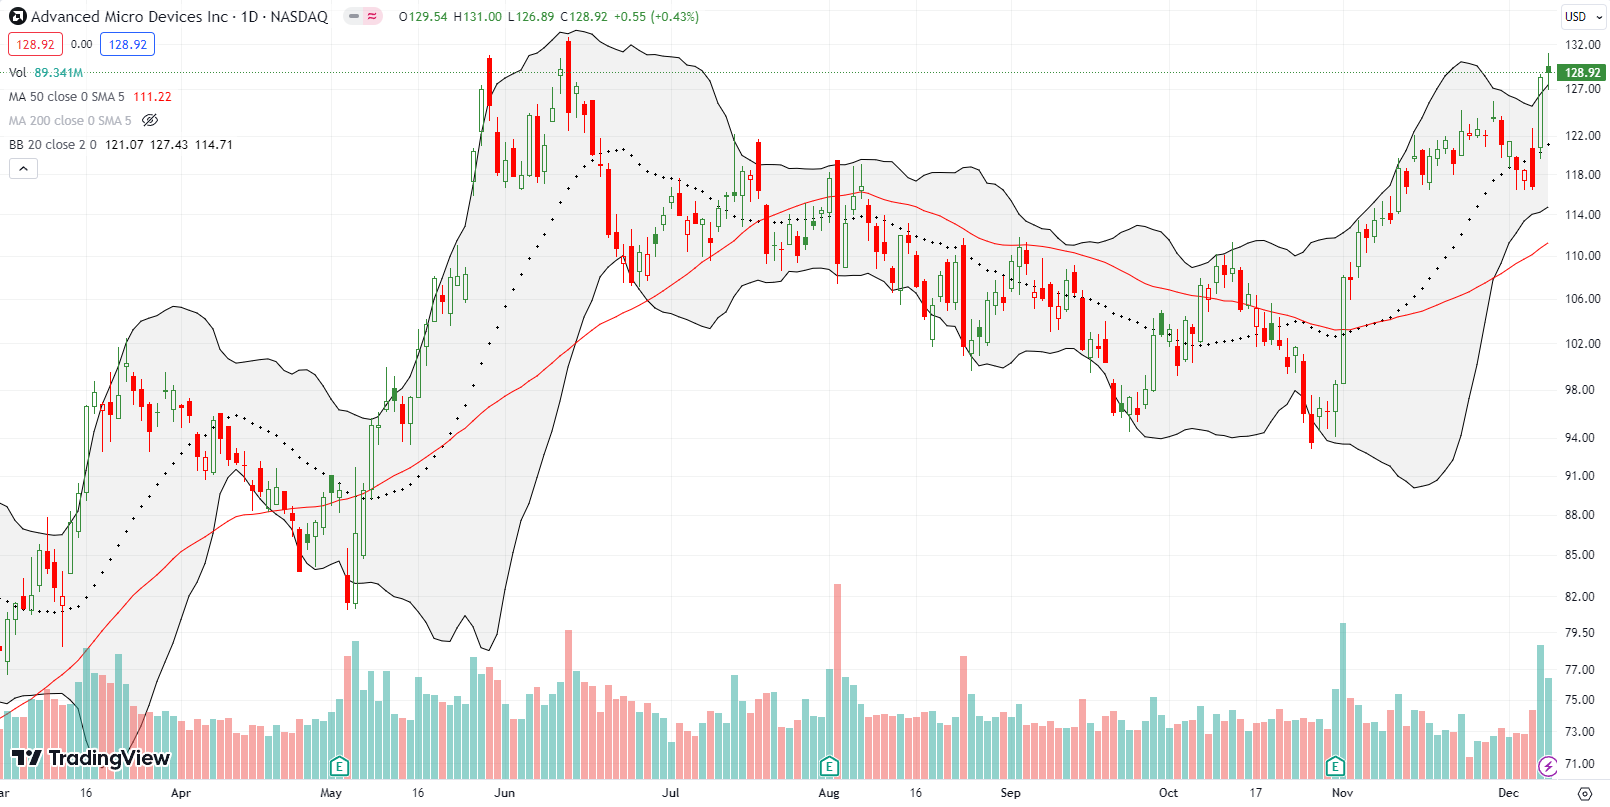 Advanced Micro Devices, Inc (AMD) confirmed an upper Bollinger Band breakout, reaching its highest point since June.